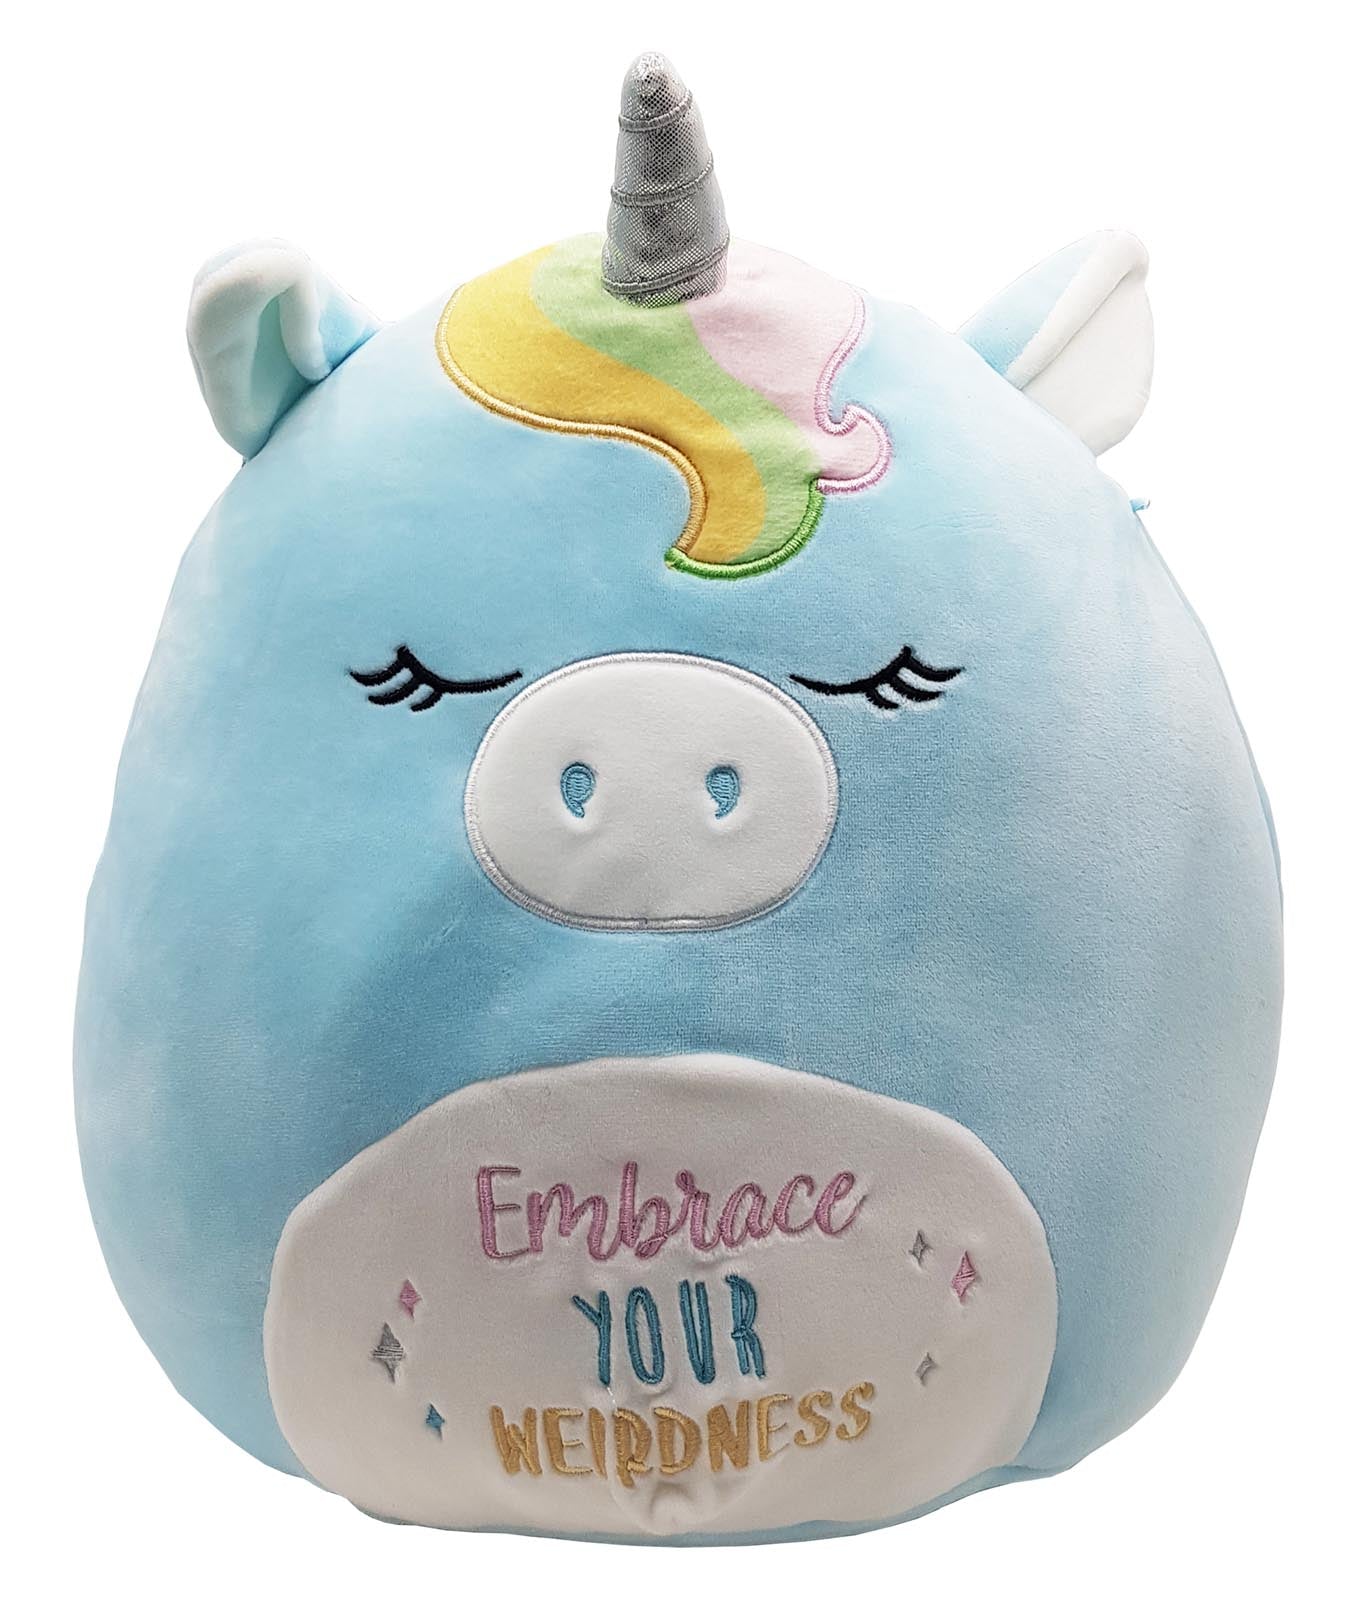 Hudson the Unicorn ~ Embrace Your Weirdness ~ INSPIRATIONAL MESSAGES Squad ~ 12" inch Squishmallow ~ In Stock!